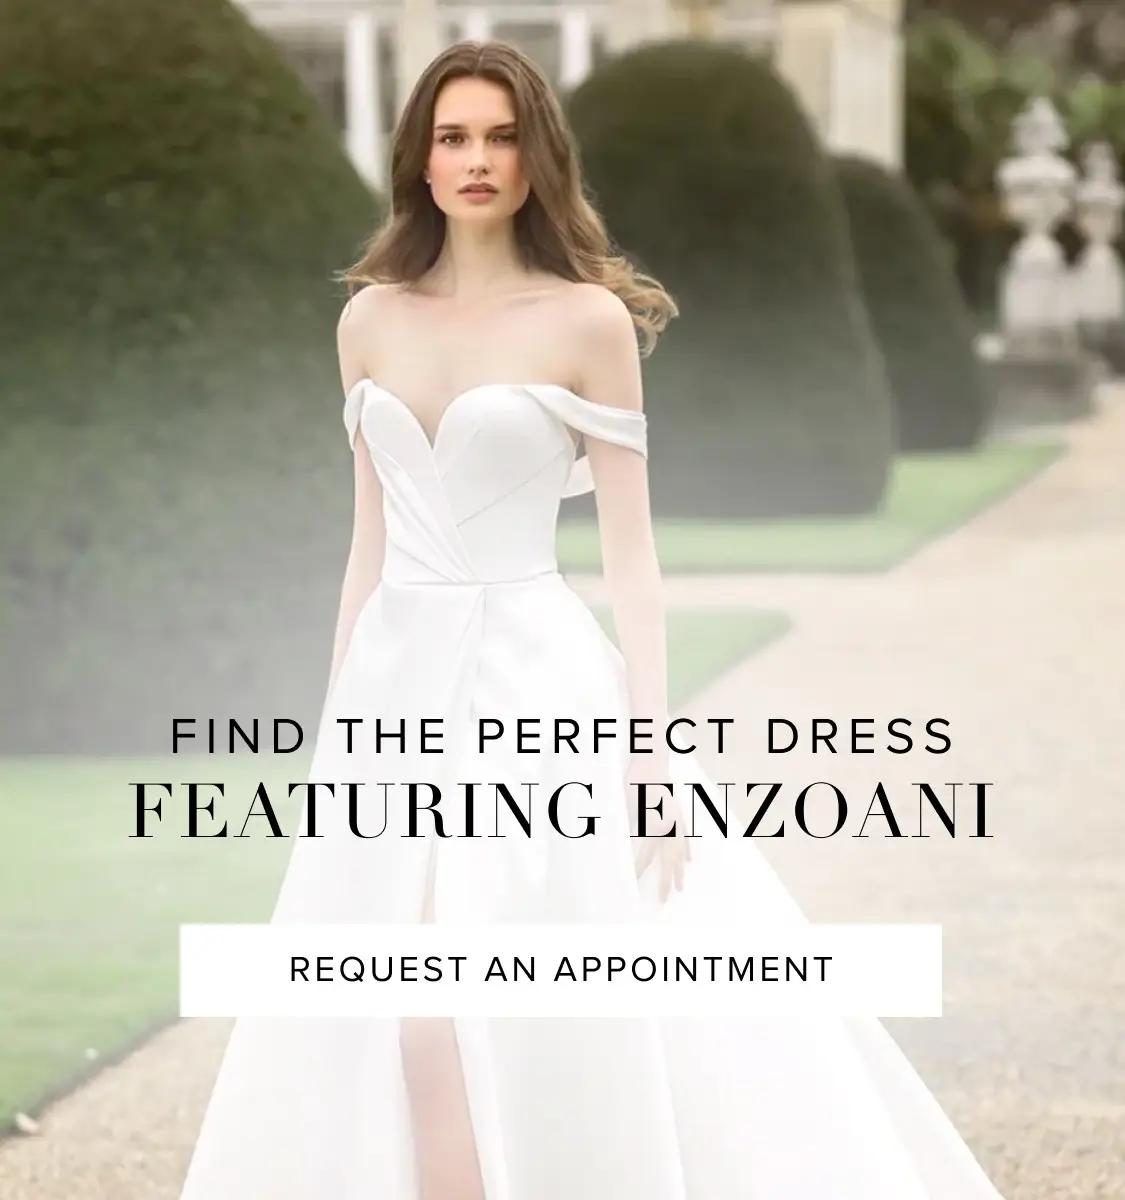 Find the perfect dress. Featuring Enzoani. Mobile banner